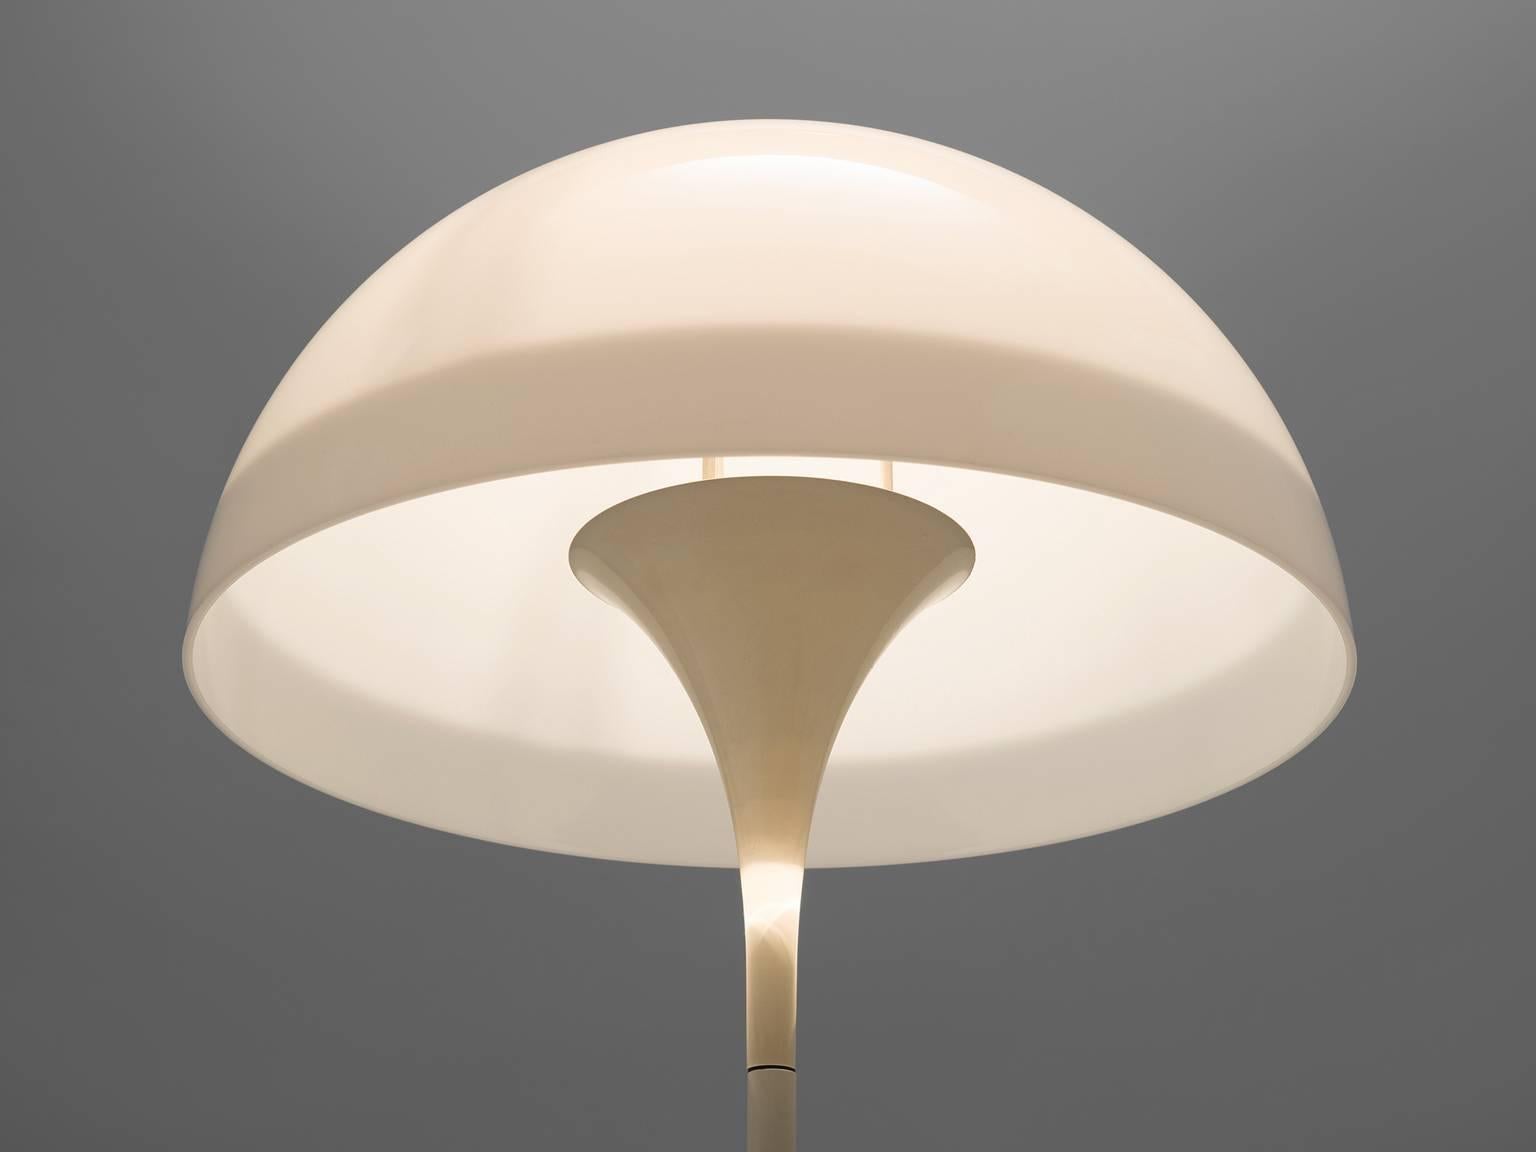 Late 20th Century Early Verner Panton Panthella for Louis Poulsen Floor Lamps